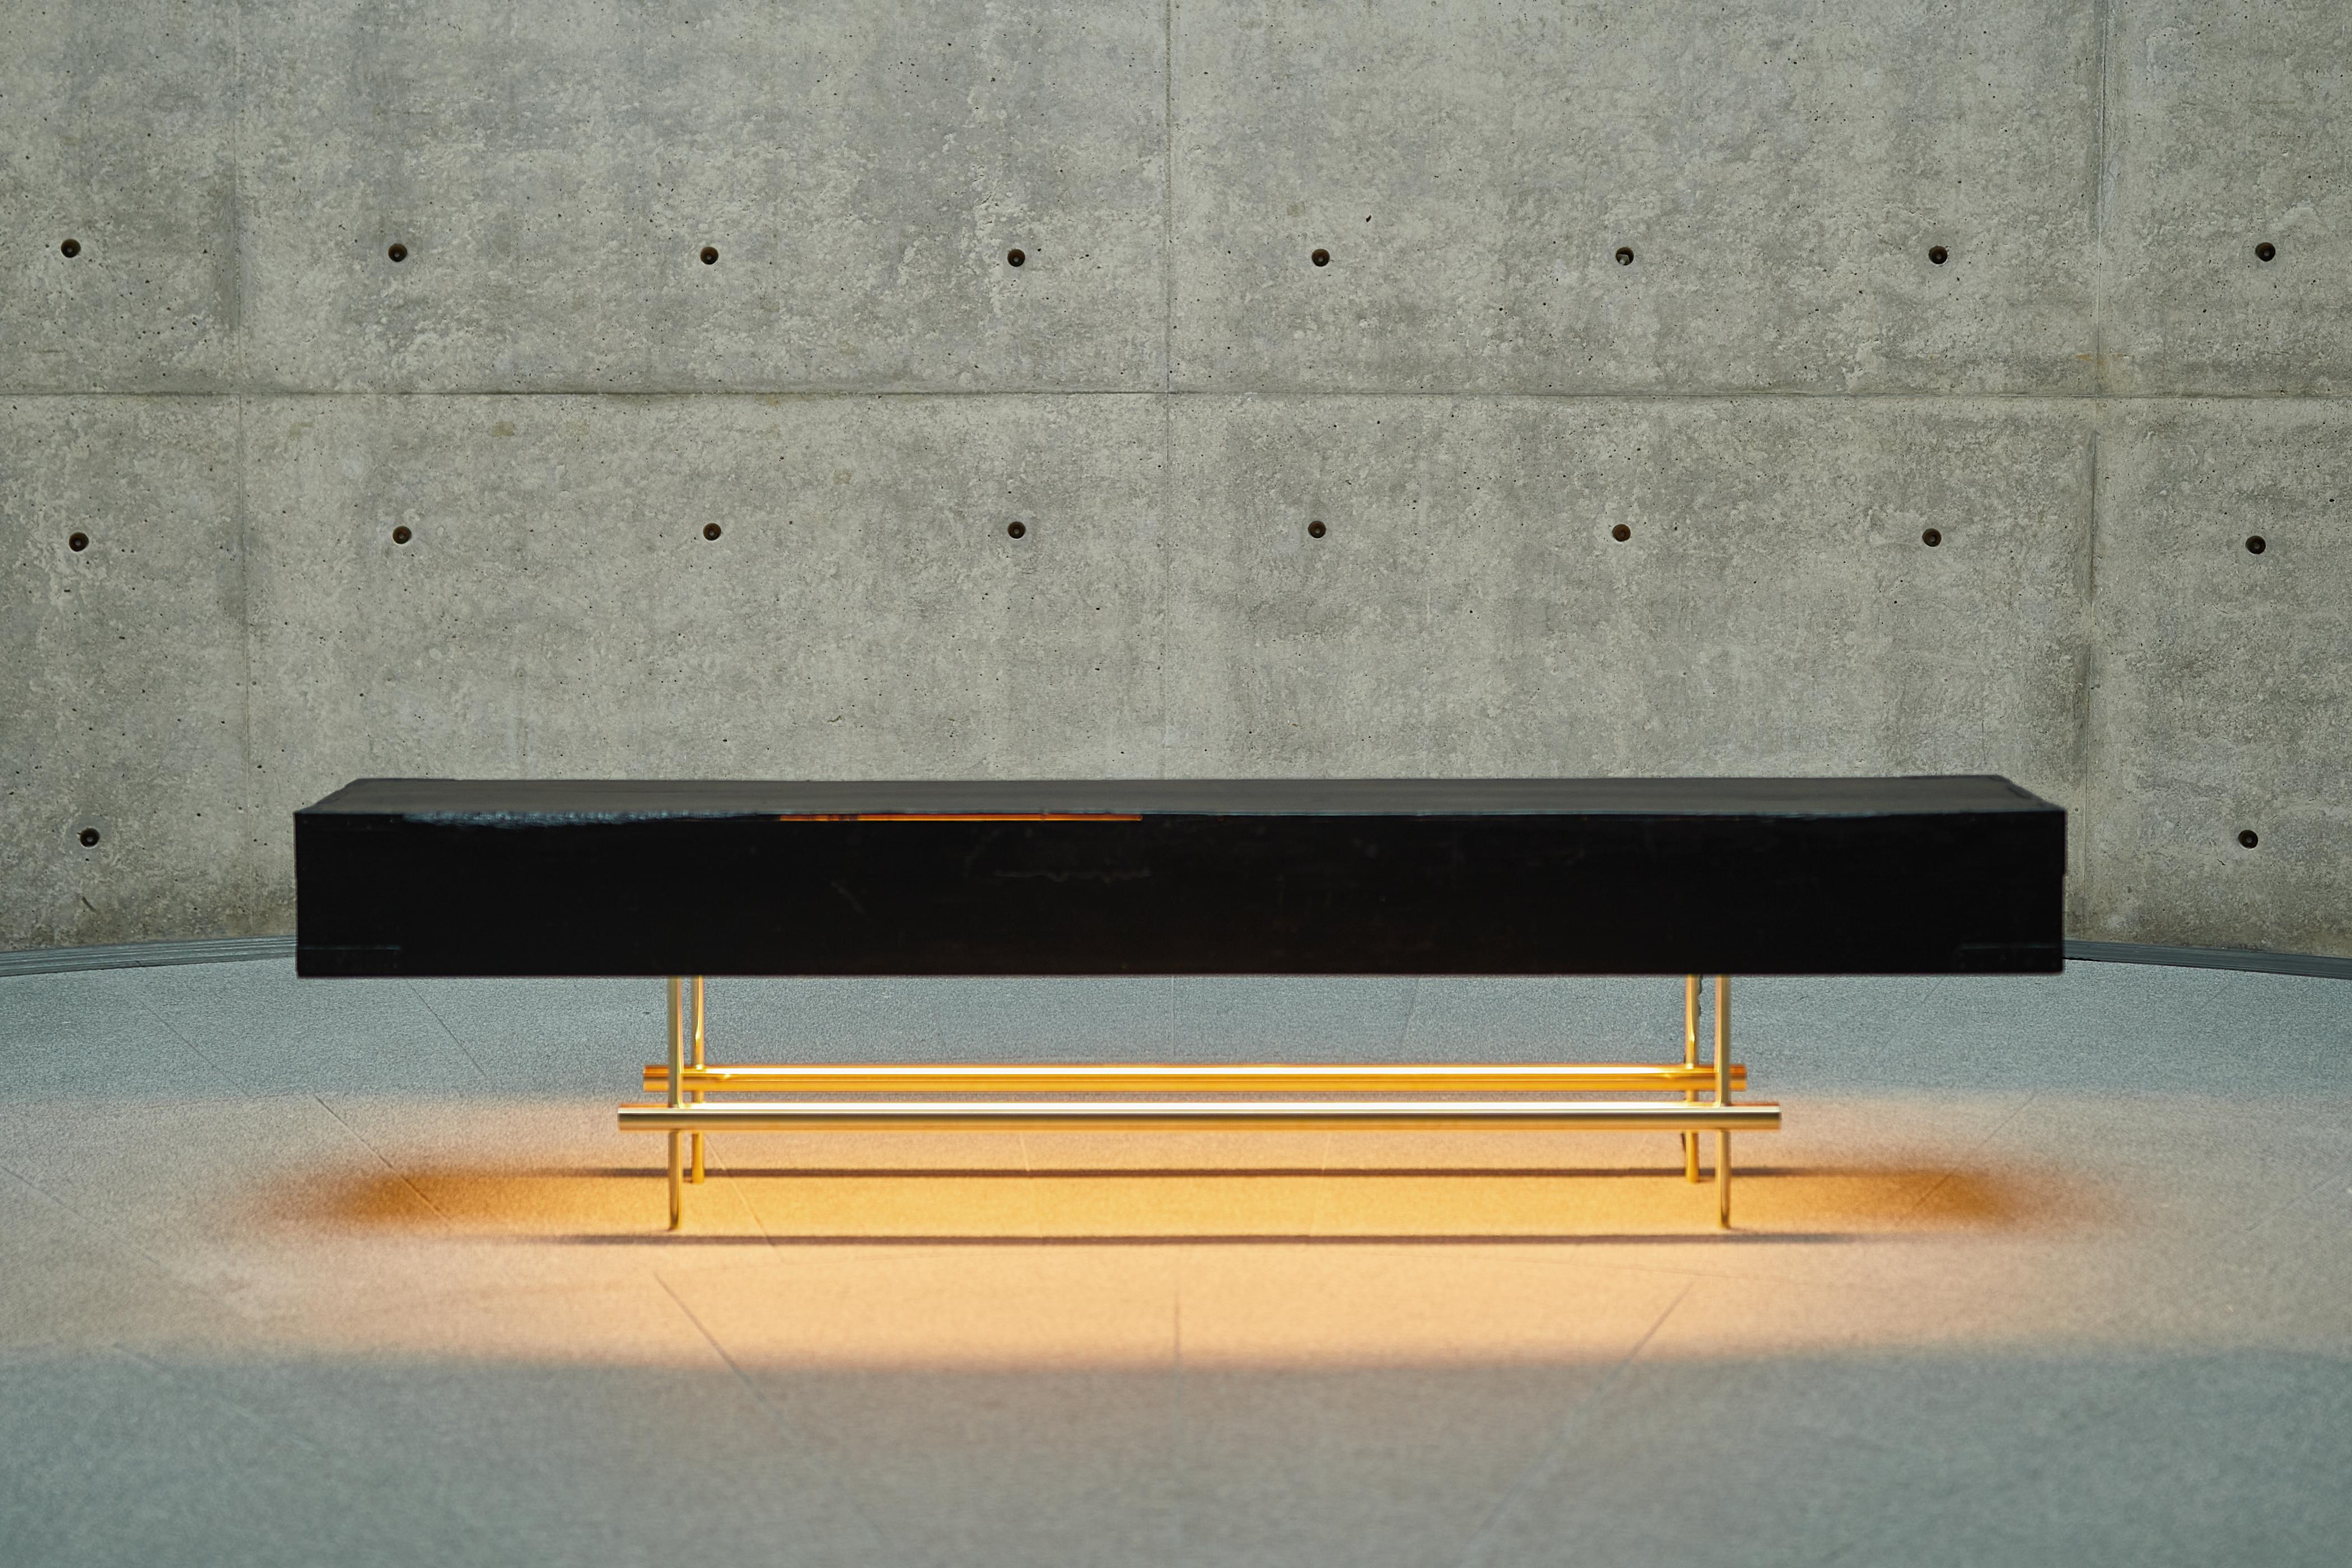 Console light table designed by Ryosuke Harashima.
Name: How deep the dark.
Collection: Stillife
A low table by morphing a wooden box lid that stores two Japanese gold folding screens. The lights are emphasis the attractiveness of black, which